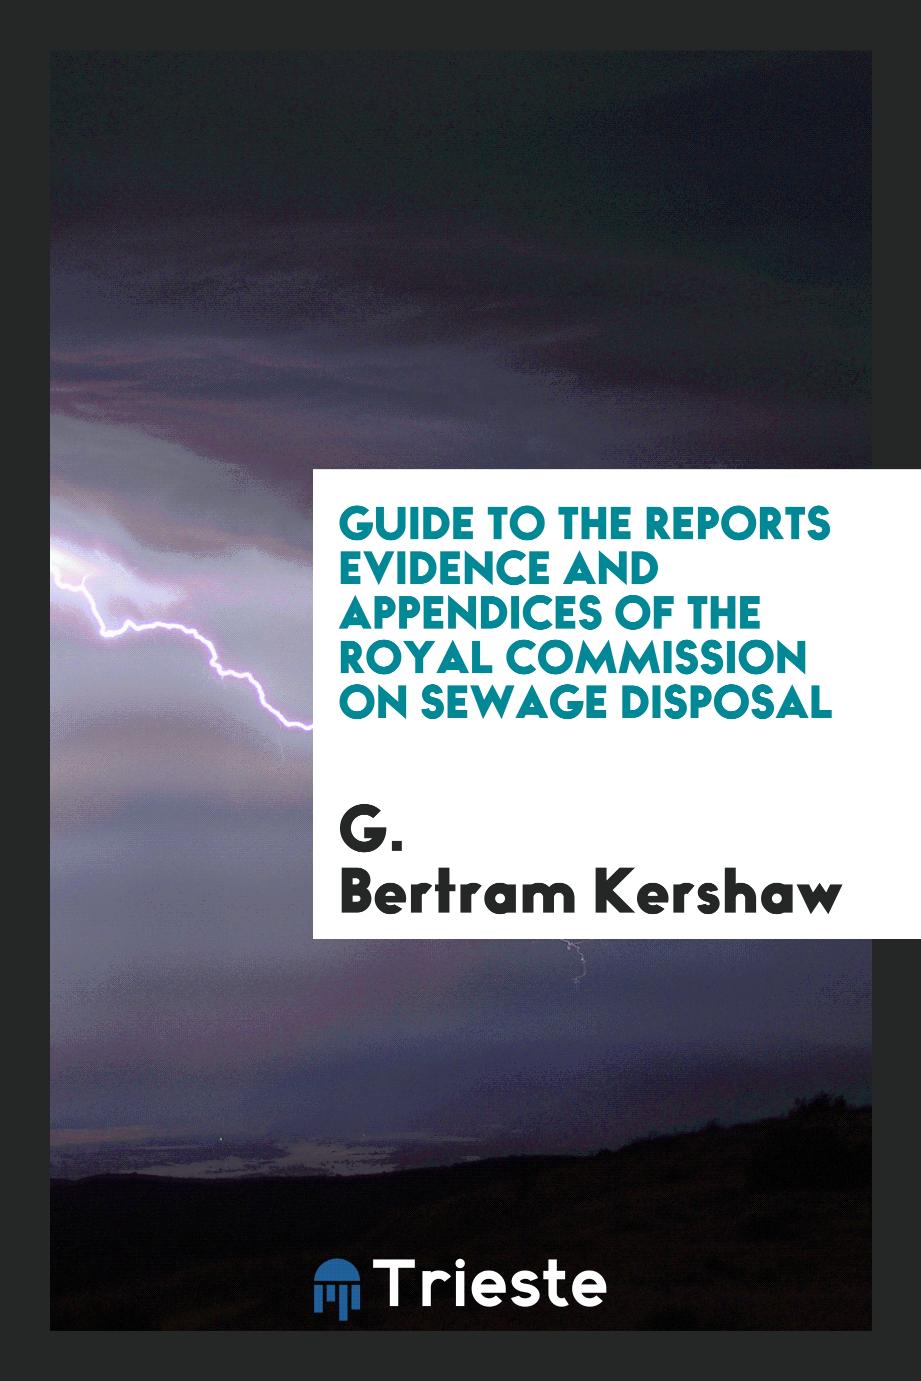 Guide to the Reports Evidence and Appendices of the Royal Commission on Sewage Disposal